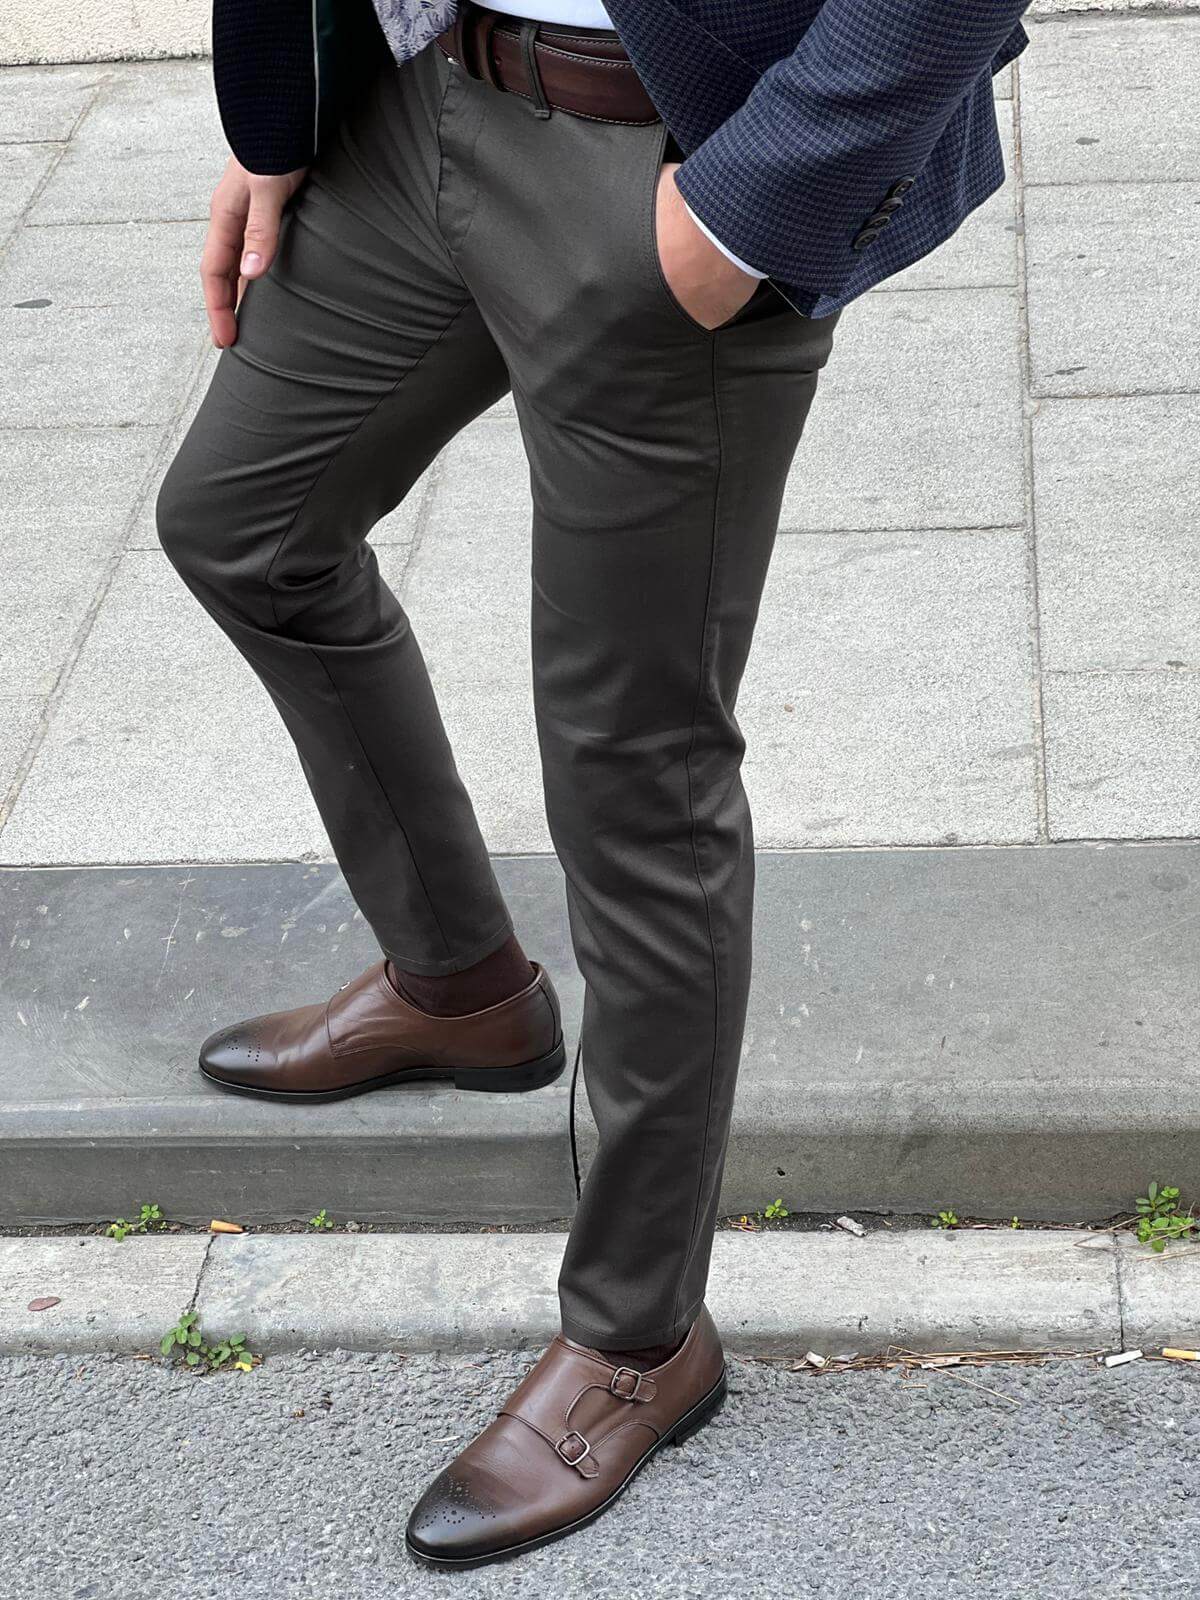 Stylish male model confidently presenting classic khaki pants with a modern twist, exuding sophistication and versatility in fashion.